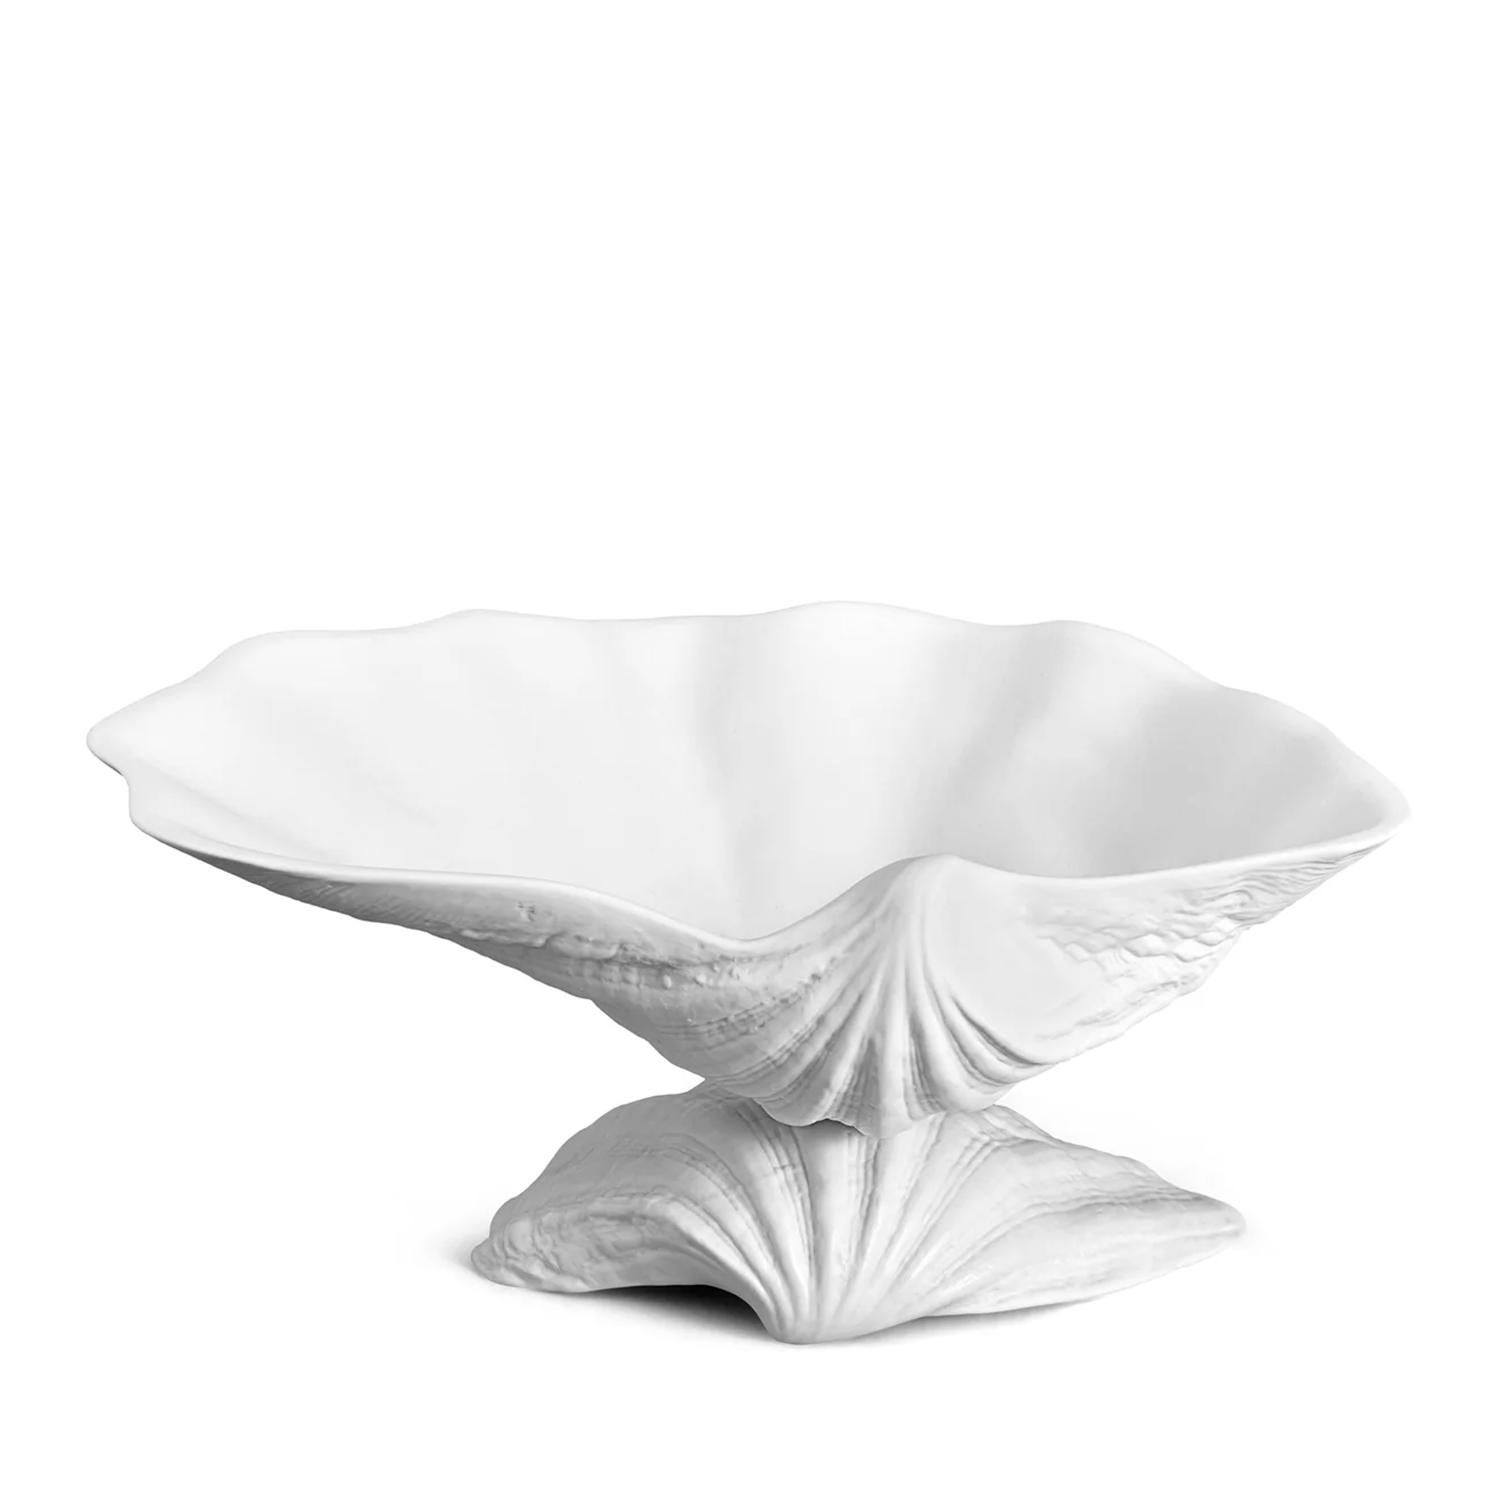 Dish Sea Shell Medium with all structure in 
fine hand-crafted porcelain in white finish.
Delivered in luxury gift box.